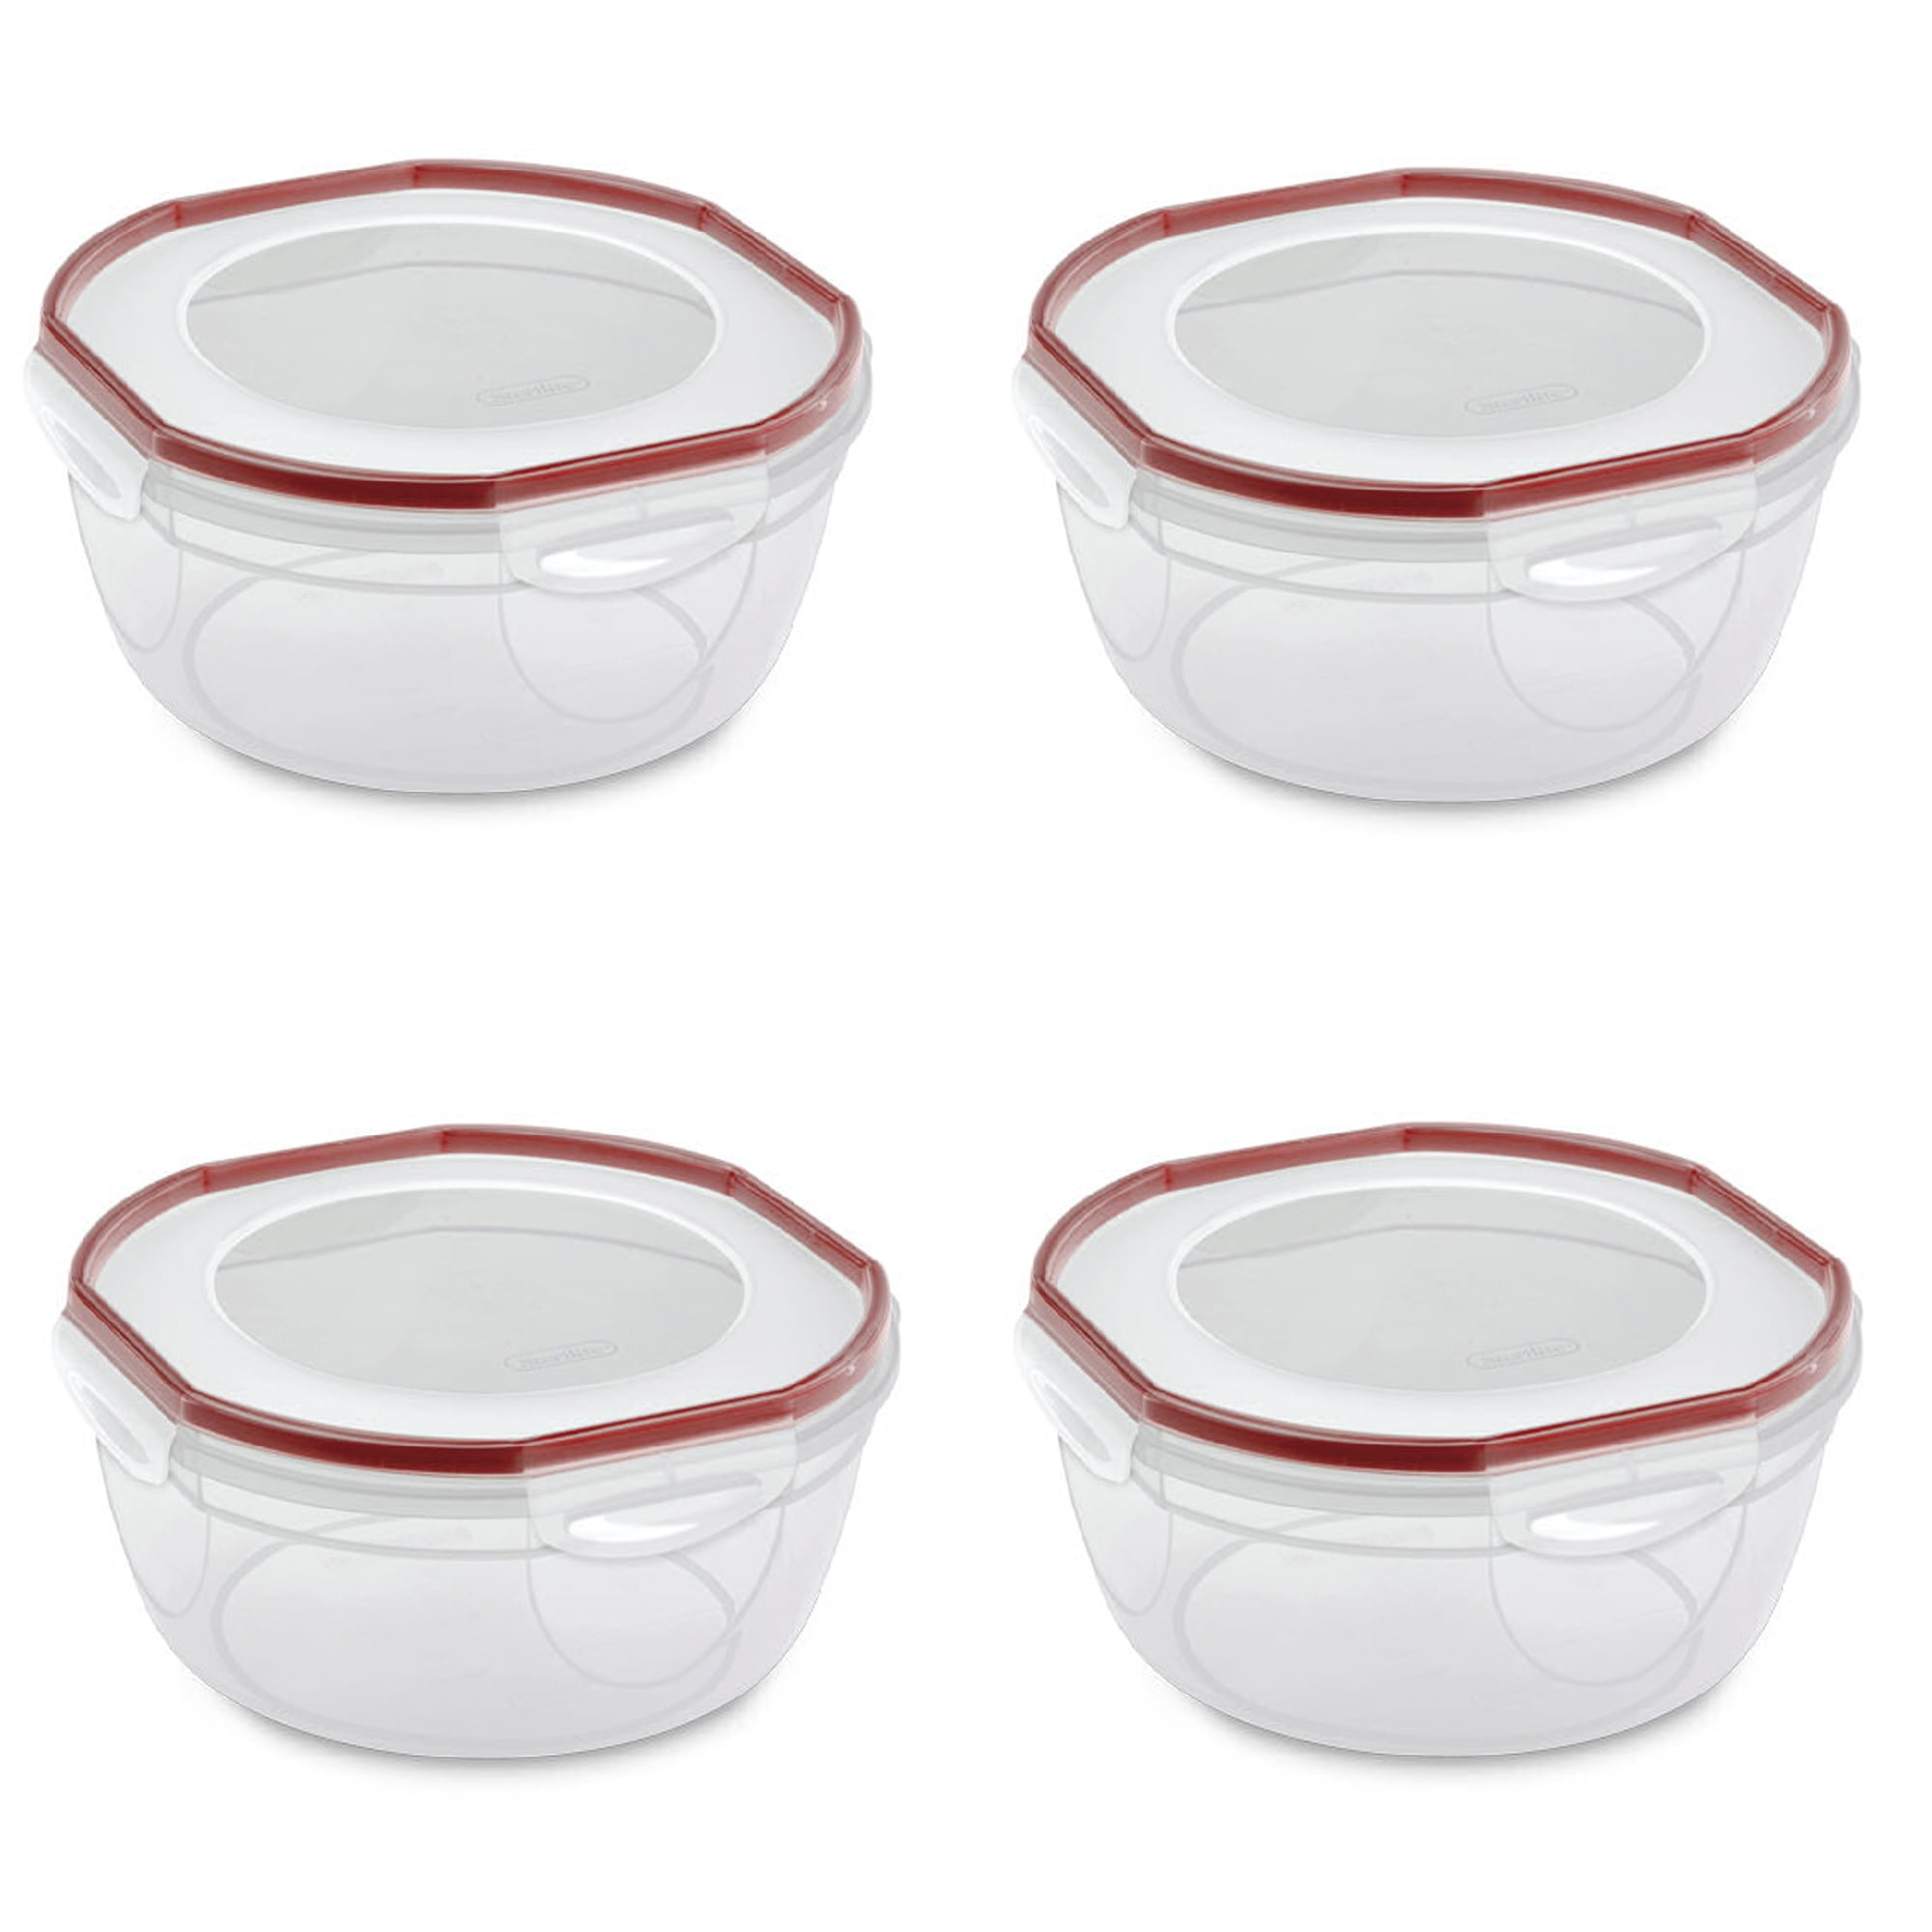 4 NEW Corelle Lid for 28 oz Soup Chili Cereal Bowl Storage Cover 428-PC 6.5 